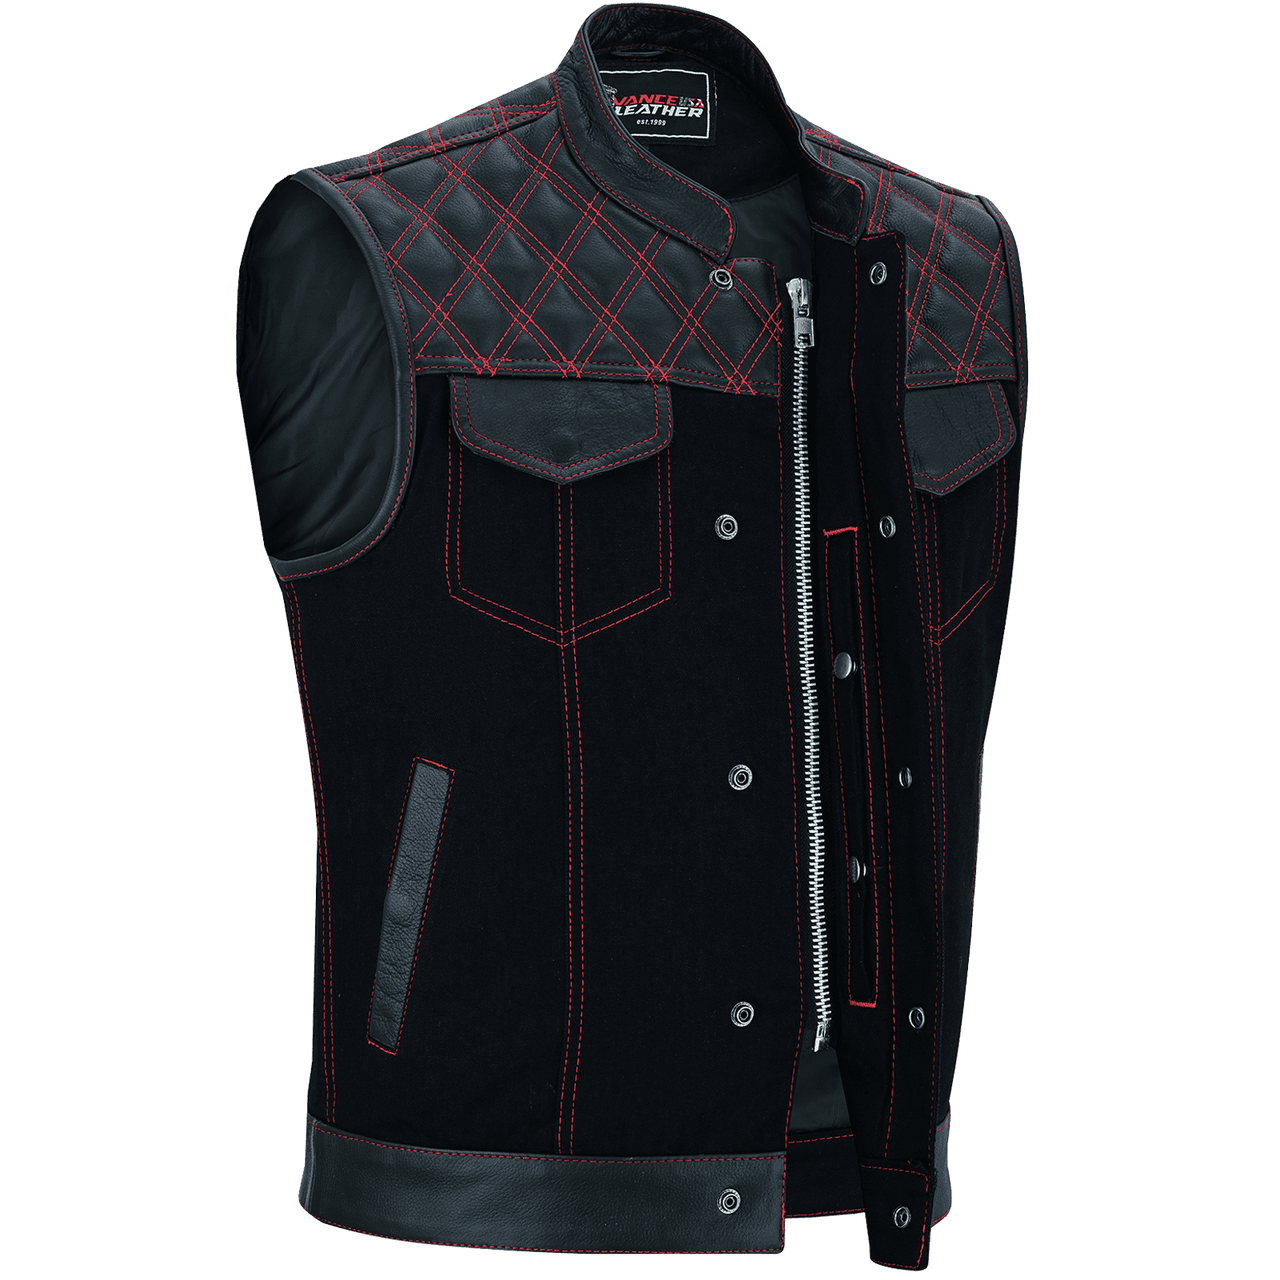 Vance-Leathers-VB924RD-Men's-Denim-Leather-Motorcycle-Vest-with-Red-Stitching-front-snap-button-zipper